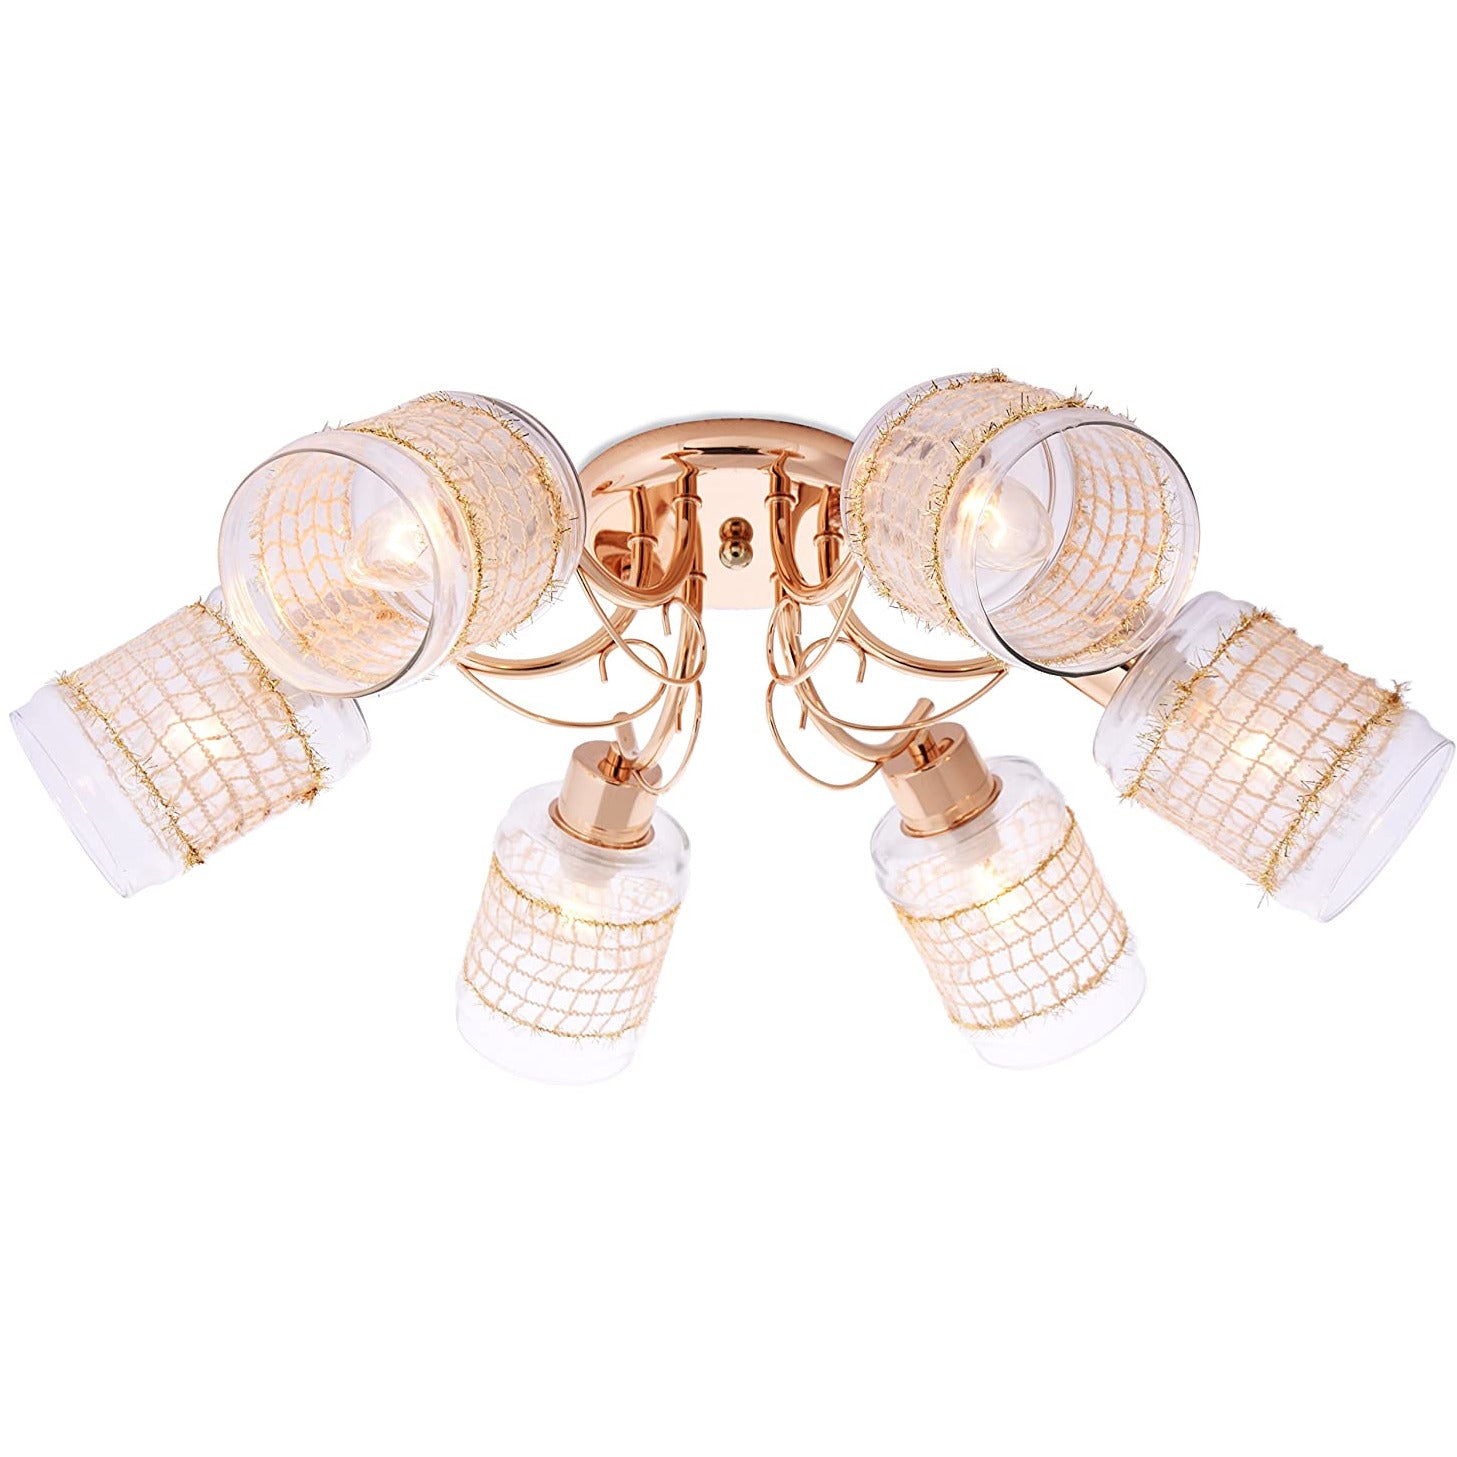 Gold 6 Arm Ceiling Light with Beautiful Glass Shades-Starry Night